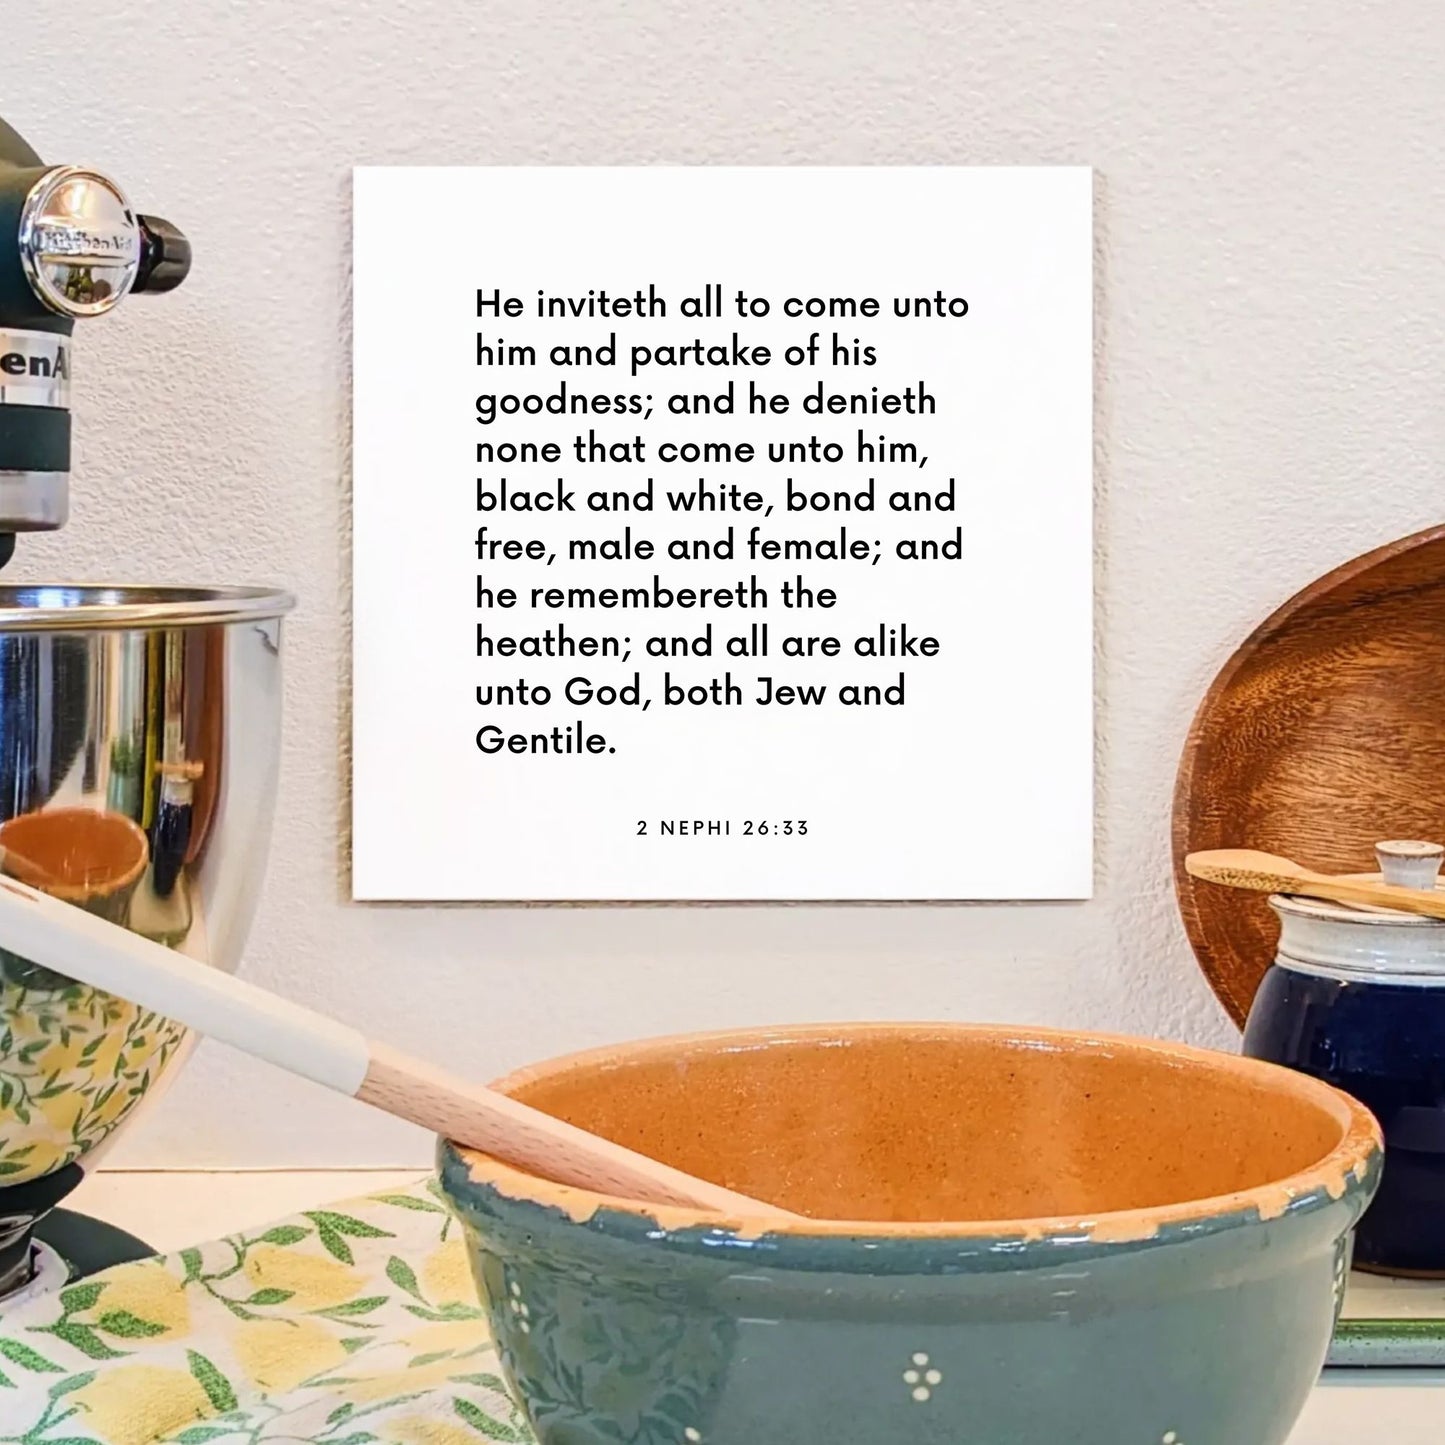 Kitchen mouting of the scripture tile for 2 Nephi 26:33 - "He inviteth all to come unto him"